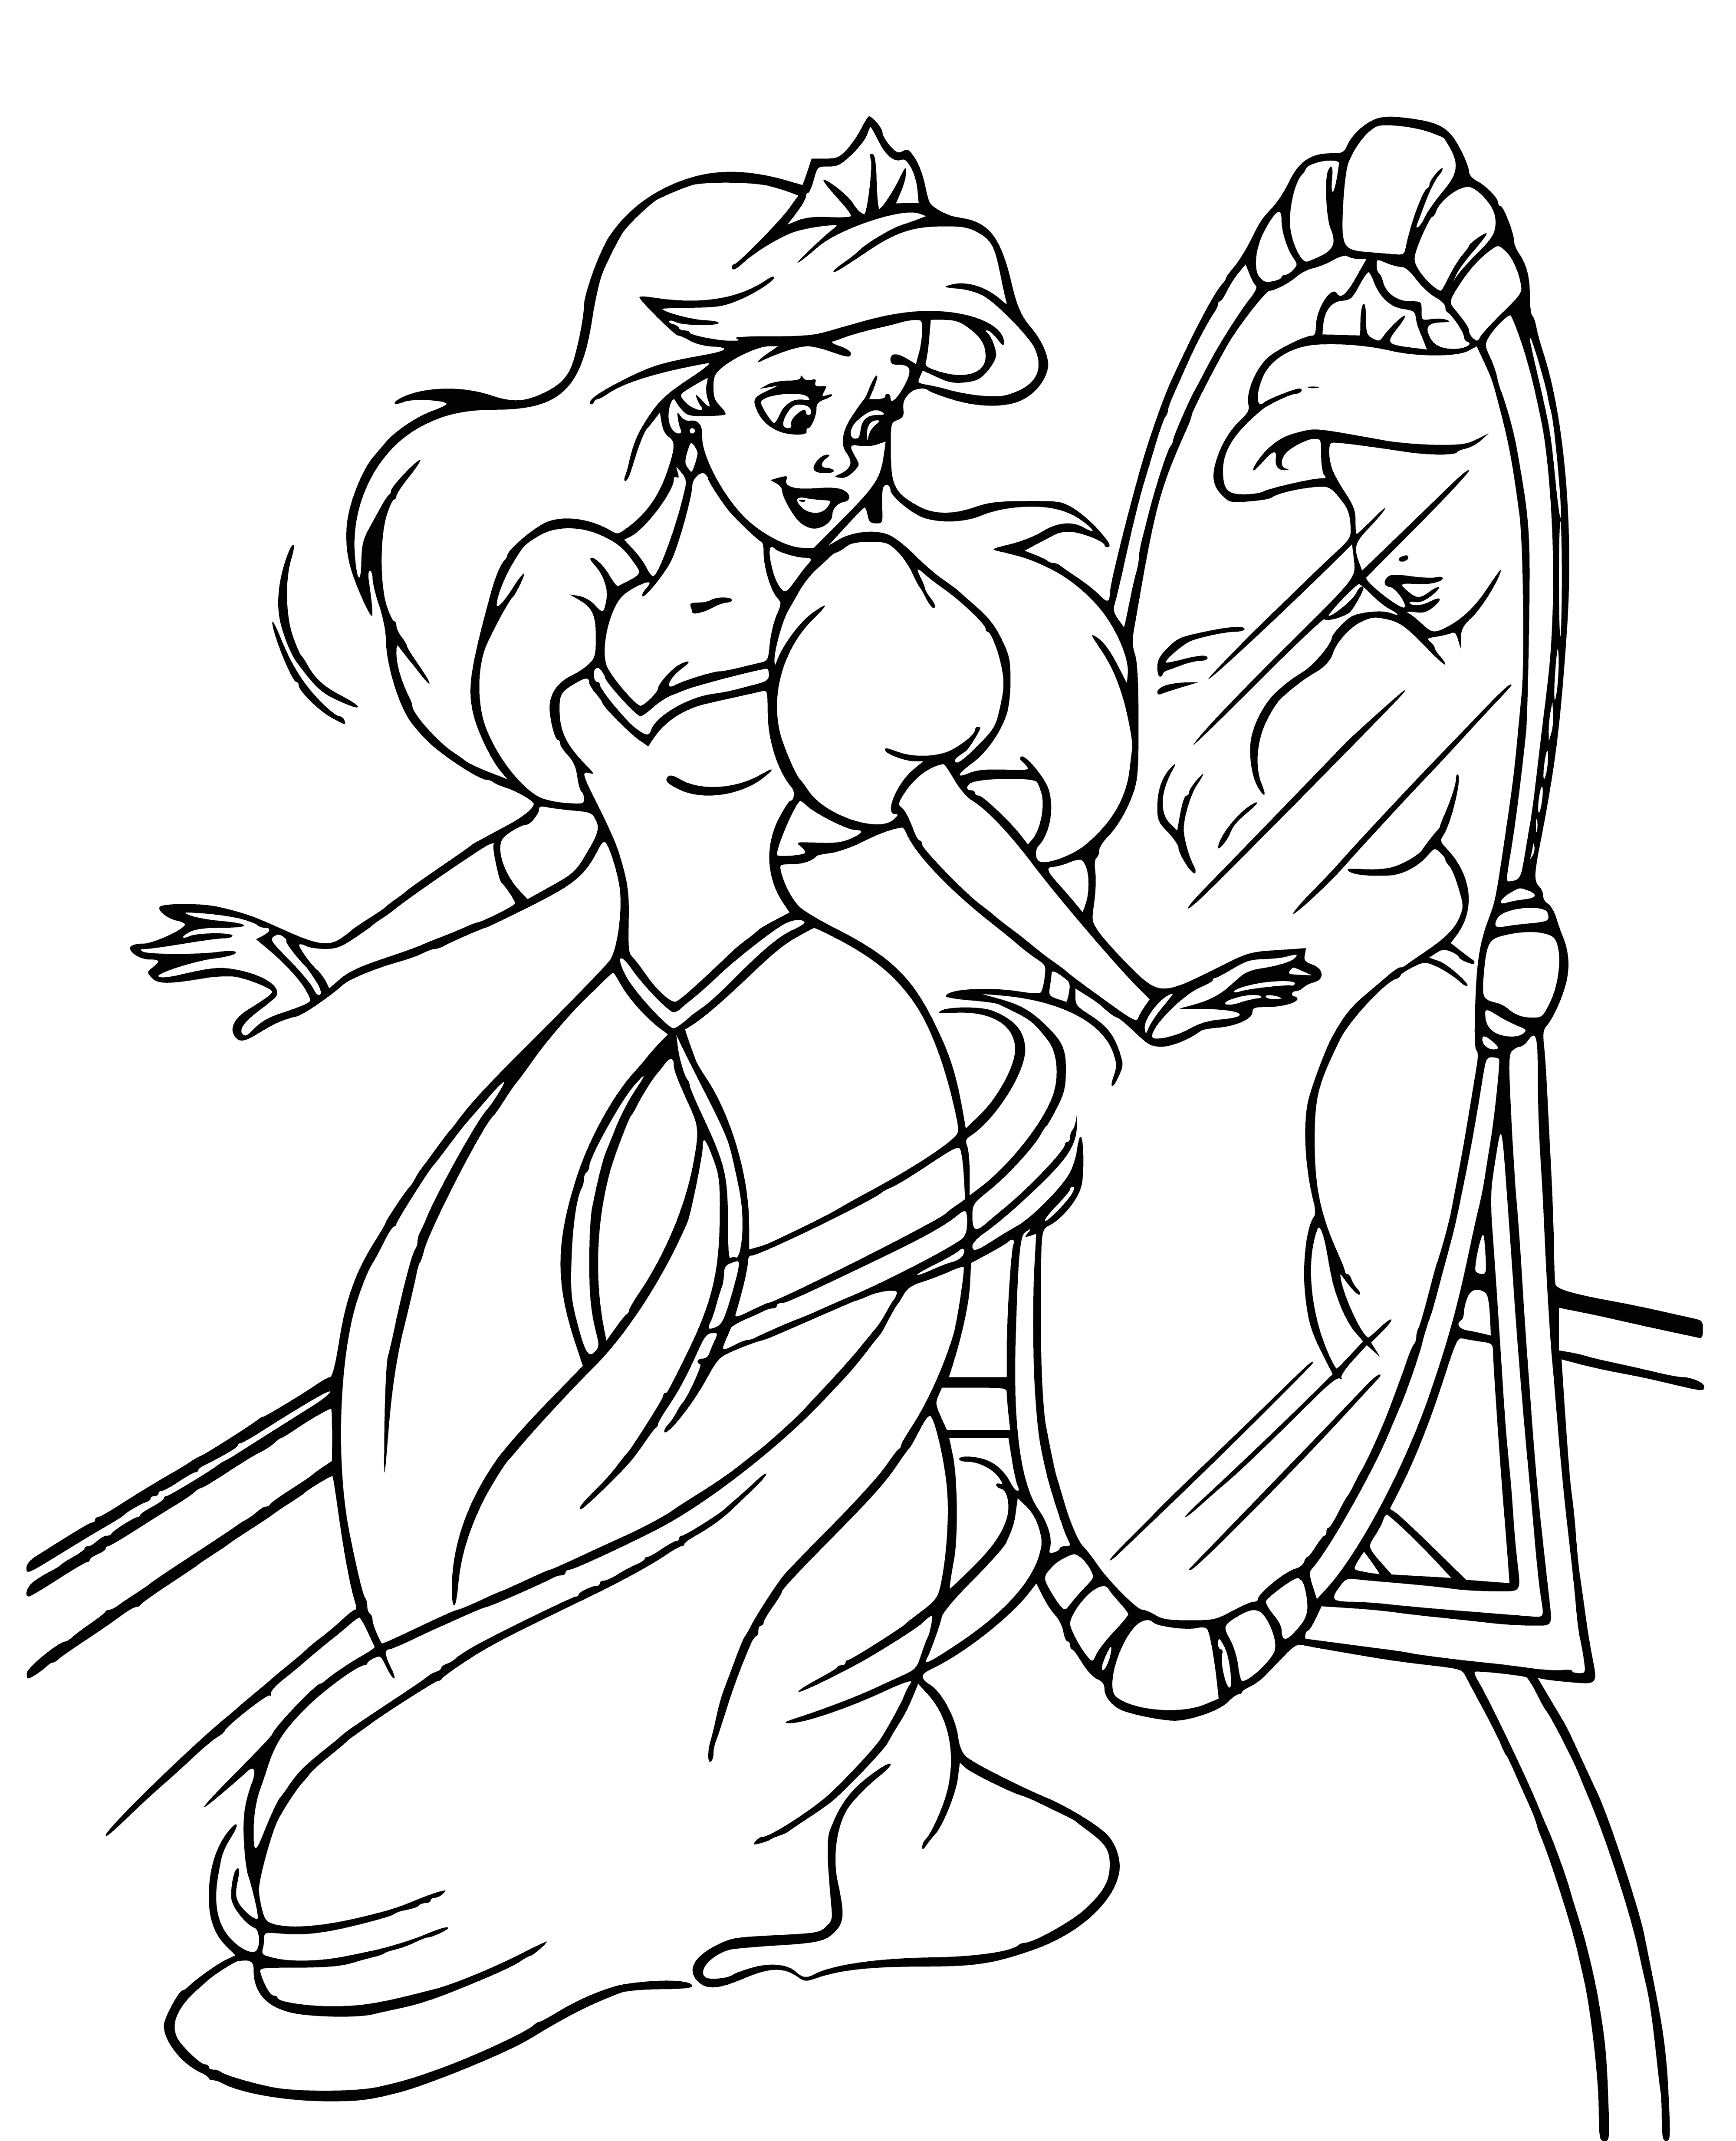 The little mermaid at the mirror coloring page